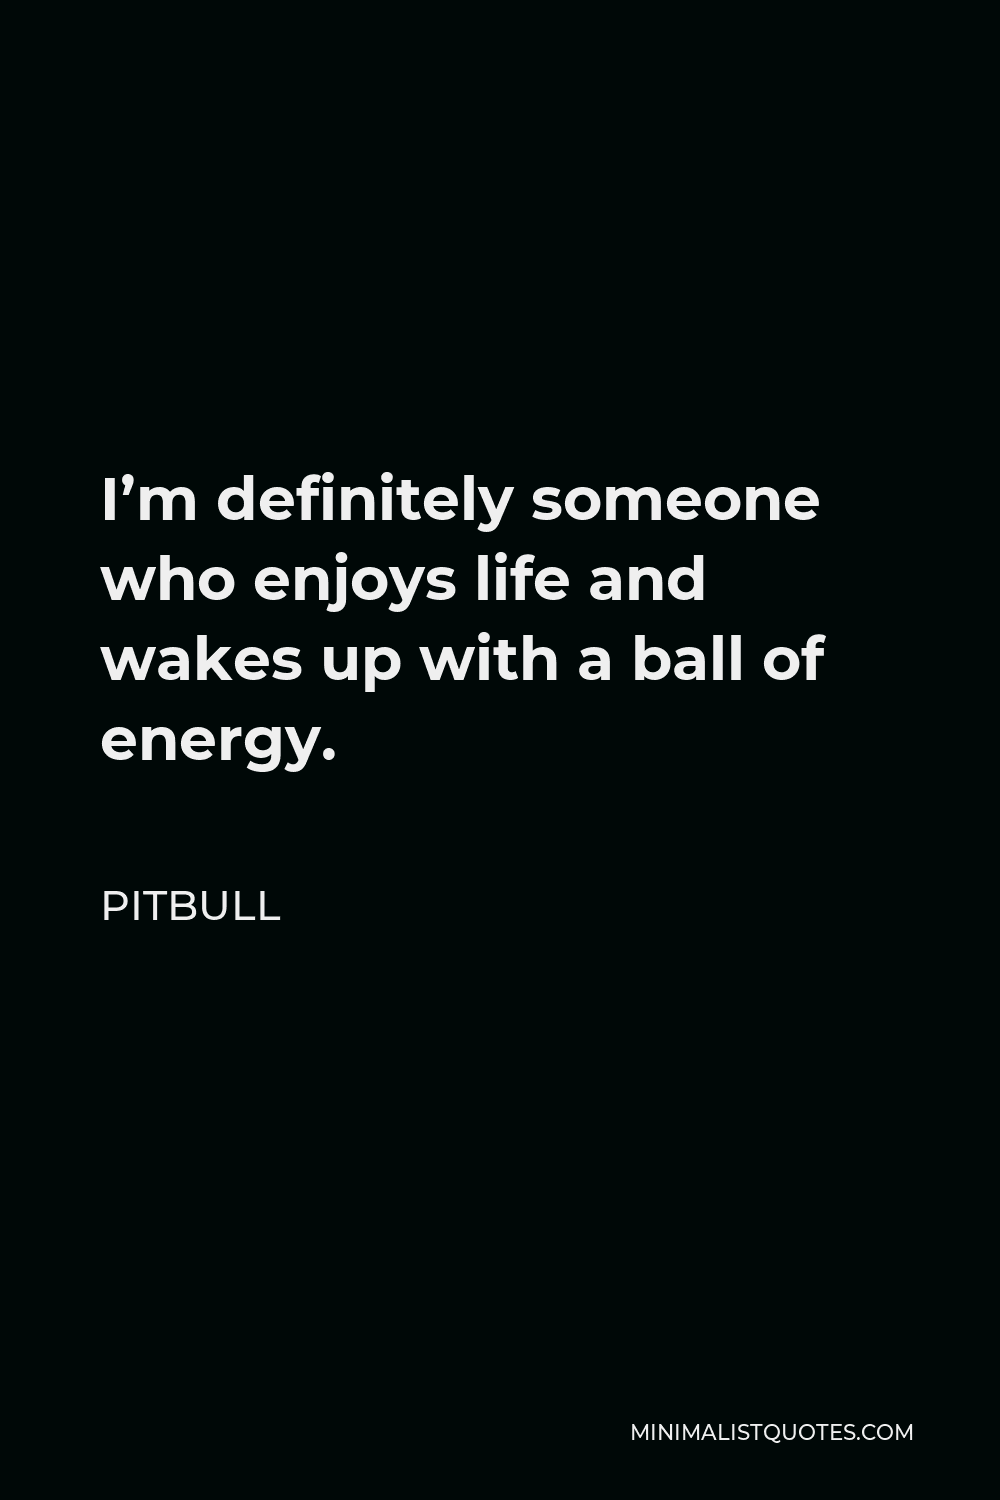 Pitbull Quote - I’m definitely someone who enjoys life and wakes up with a ball of energy.